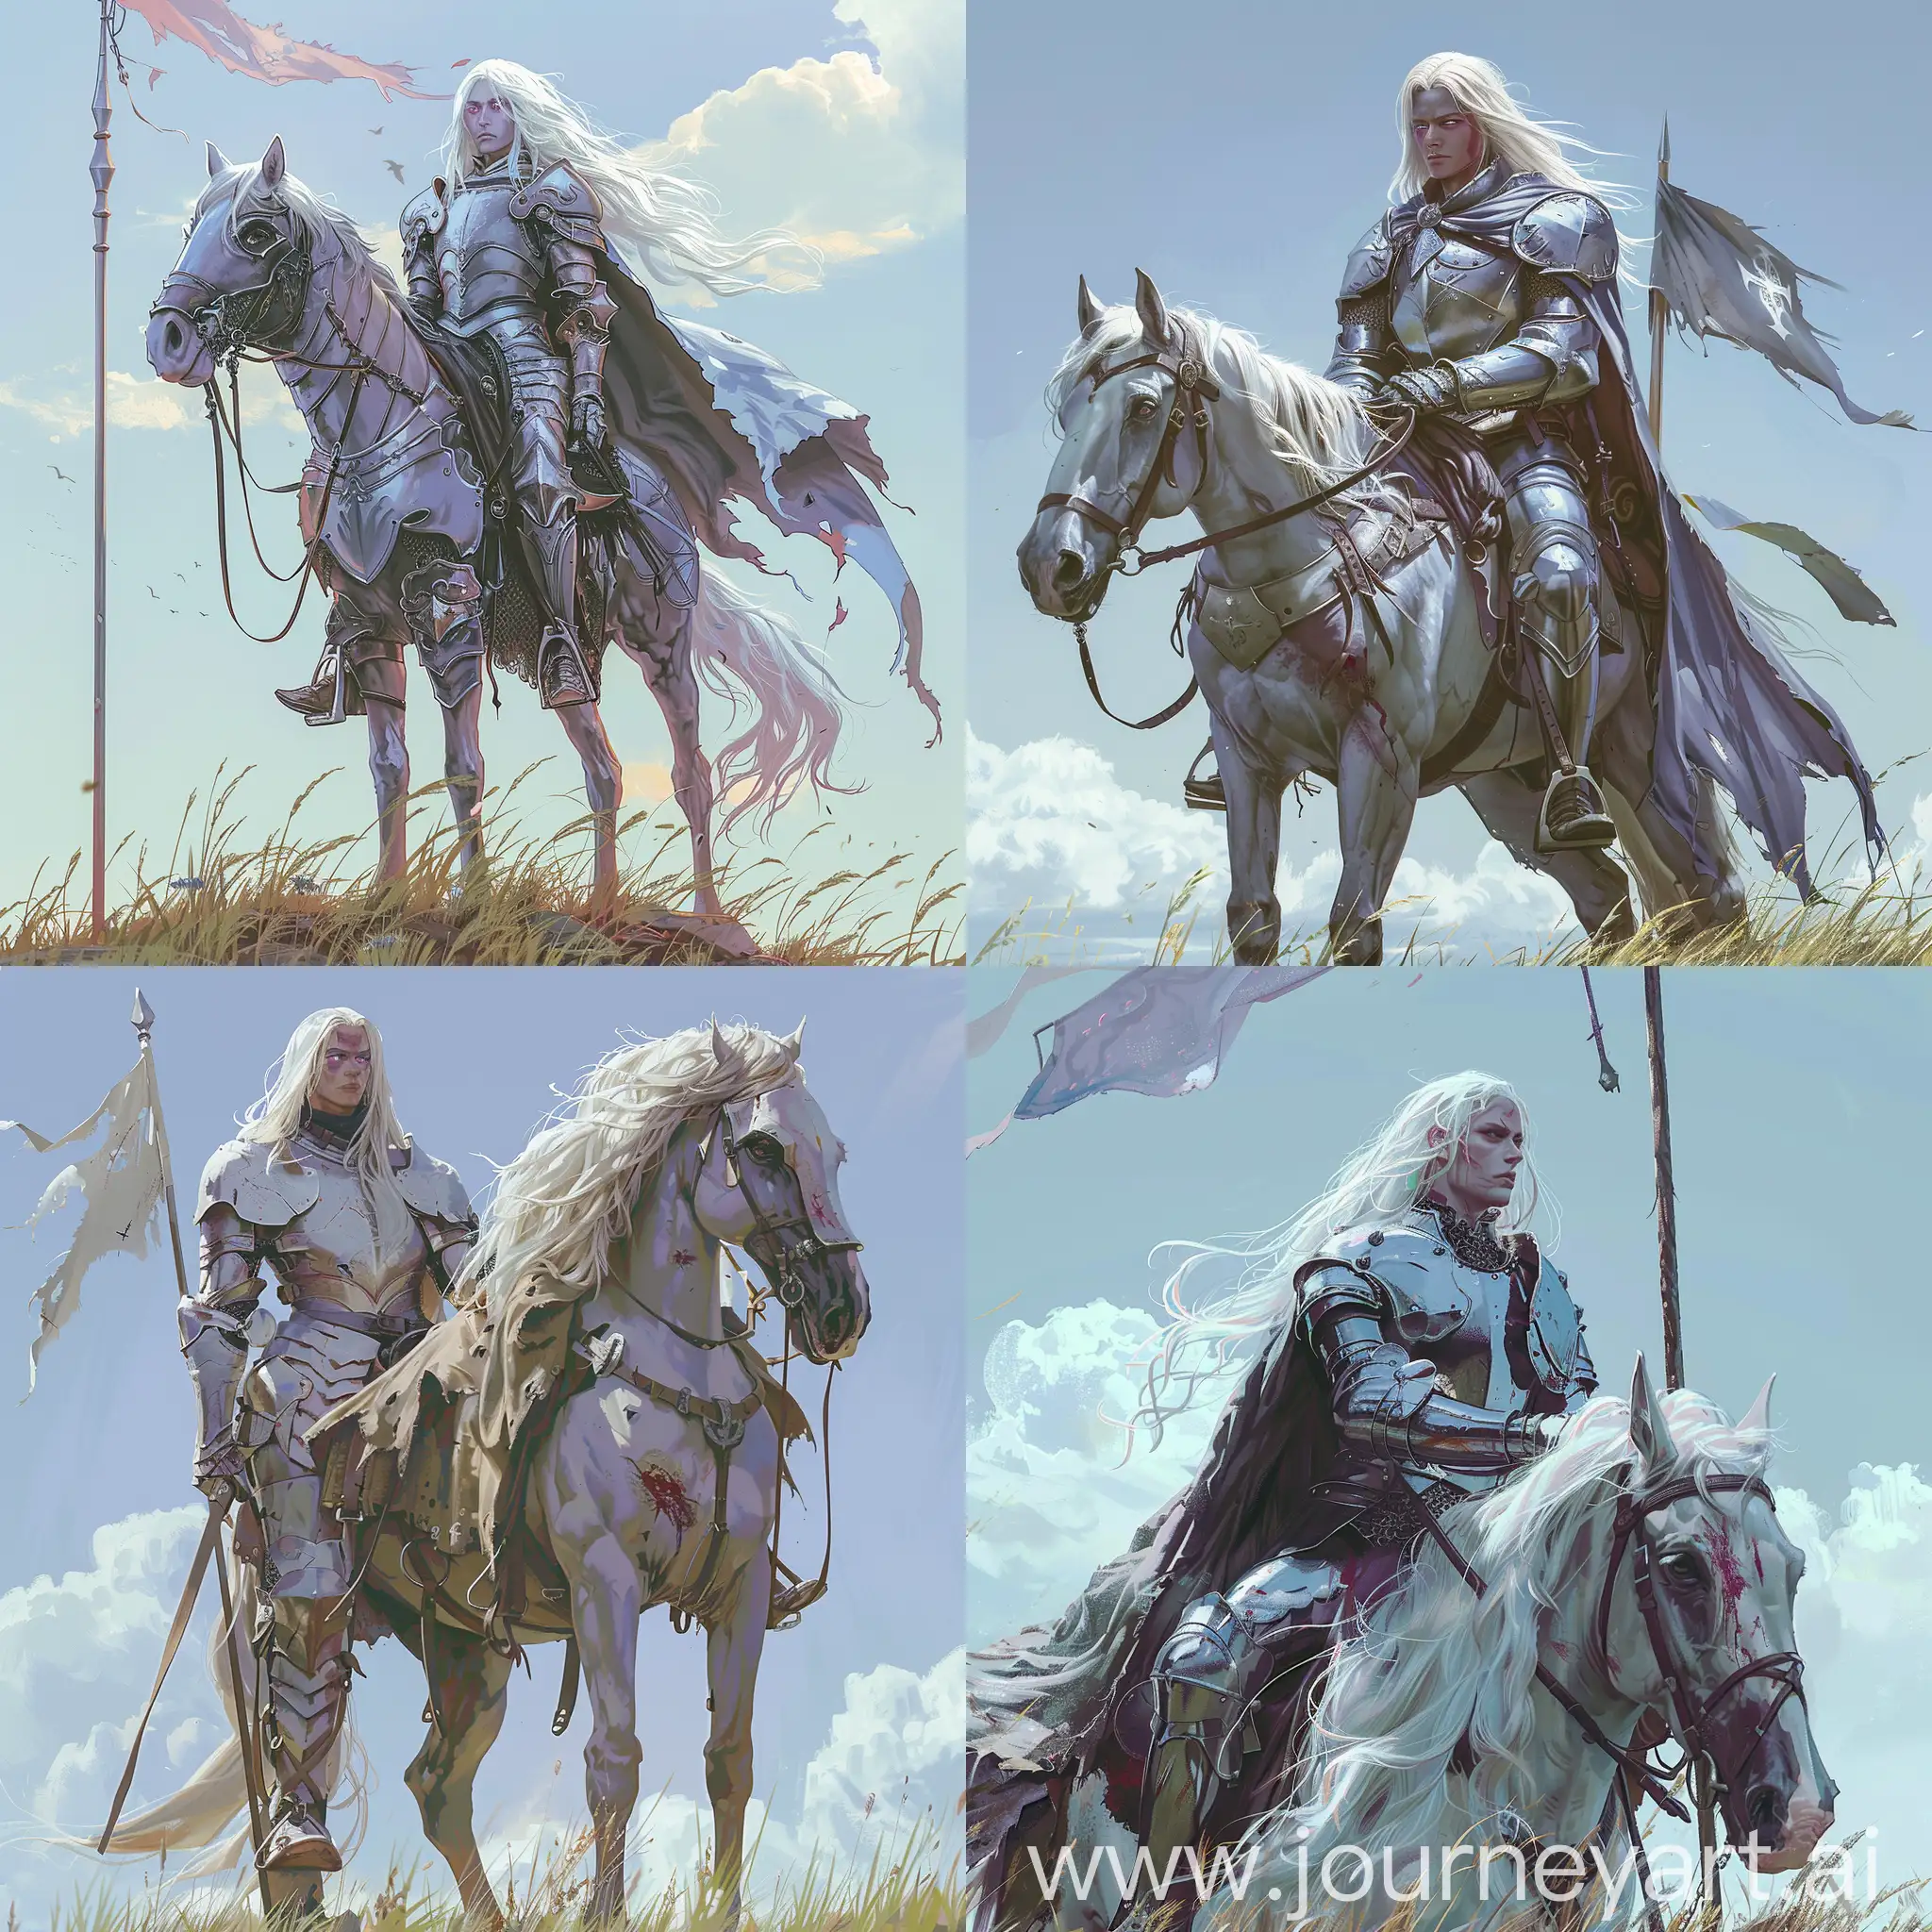 1boy, armor, armored boots, pale blue sky, breastplate, white hair, cape, day, flag, gauntlets, grass, greaves, horse, horseback riding, knight, long hair, outdoors, plate armor, reins, riding, saddle, sky, solo, weapon, silver metal, pale violet eyes, scar on the face, androgyny